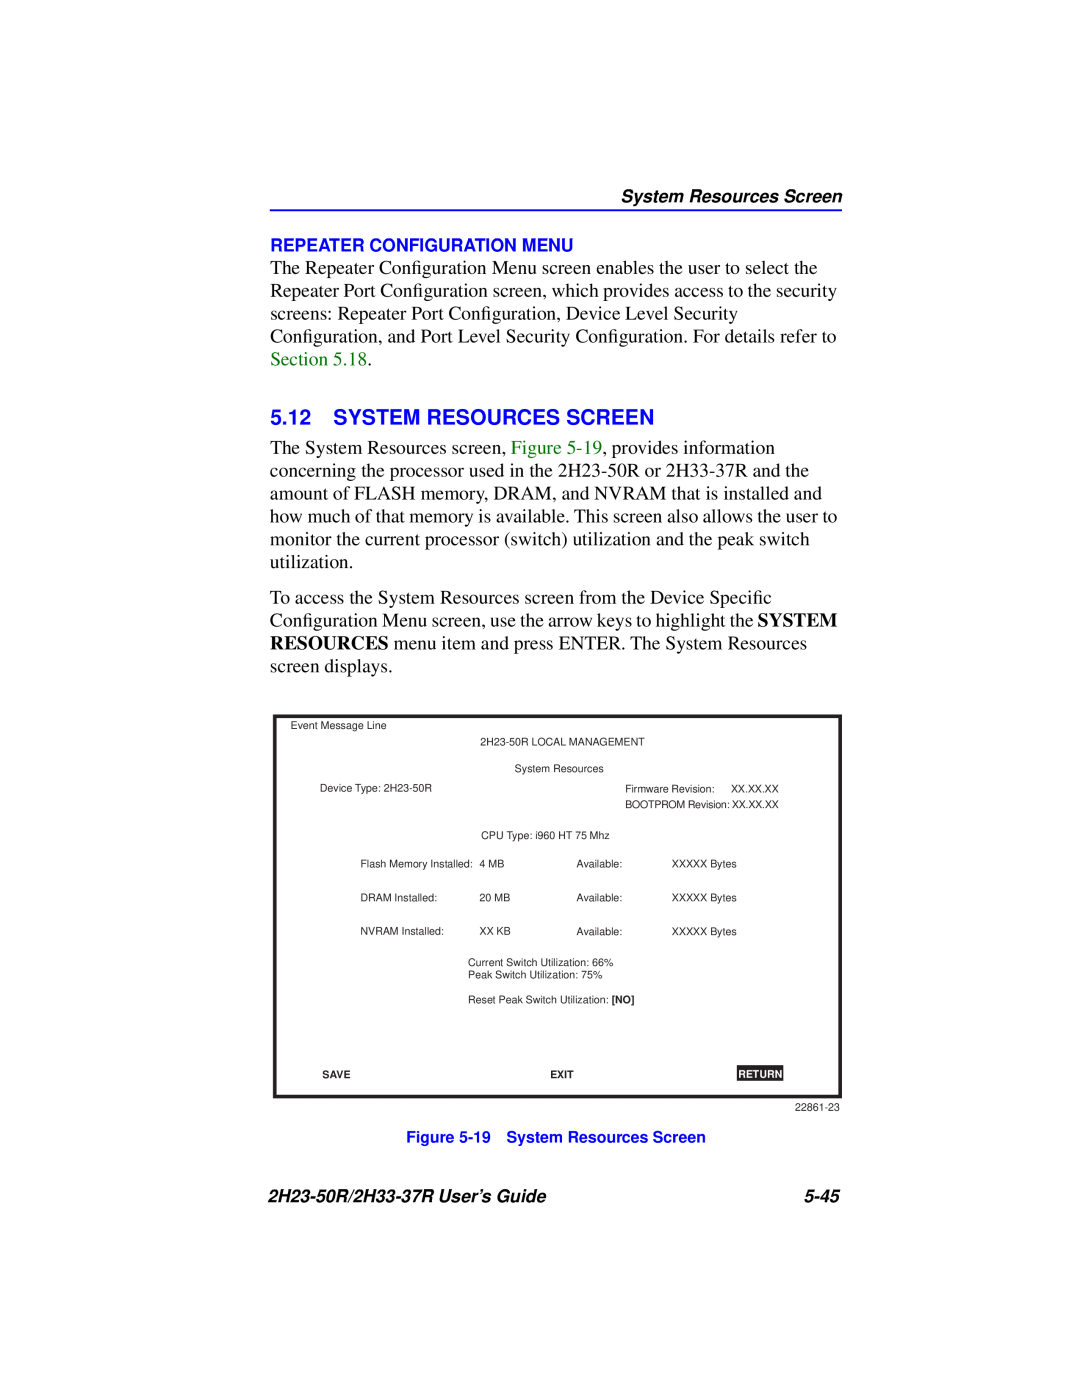 Cabletron Systems 2H23-50R, 2H33-37R manual System Resources Screen, Repeater Configuration Menu 